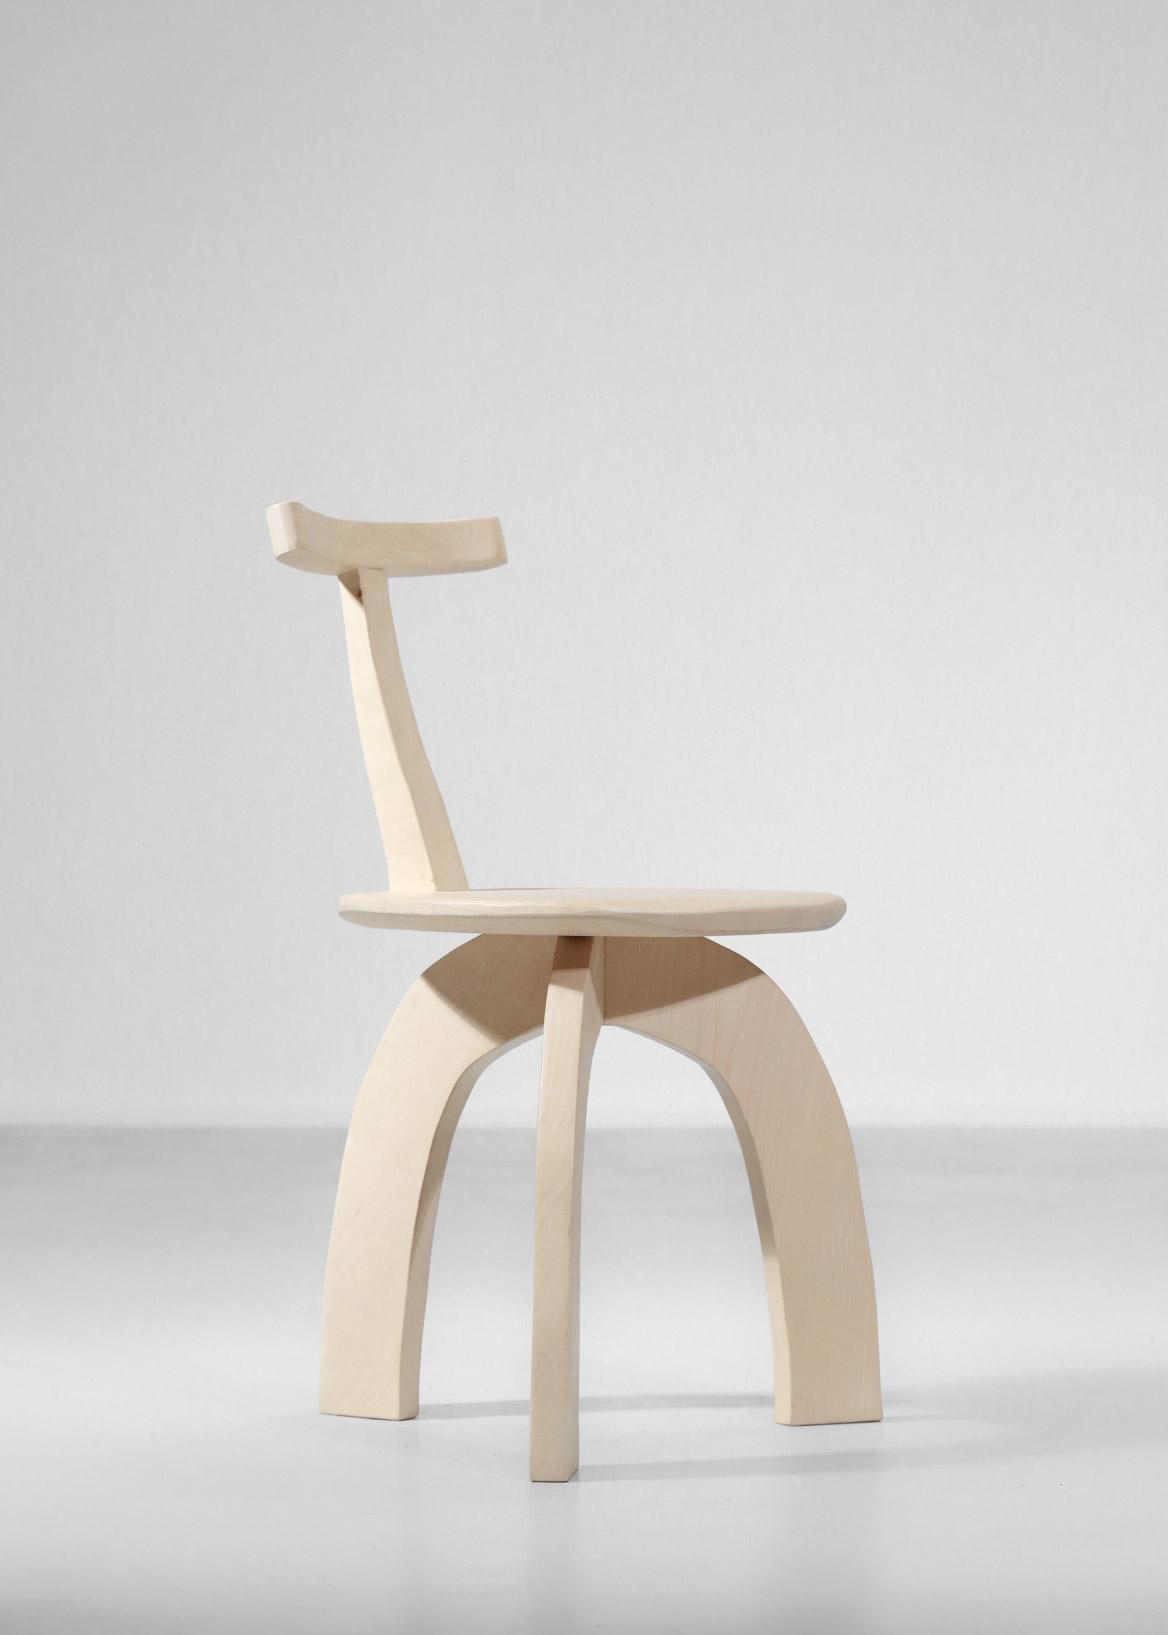 Artisanal Modern 80/20 Oak or Sycamore Chair Created by Vincent Vincent For Sale 5